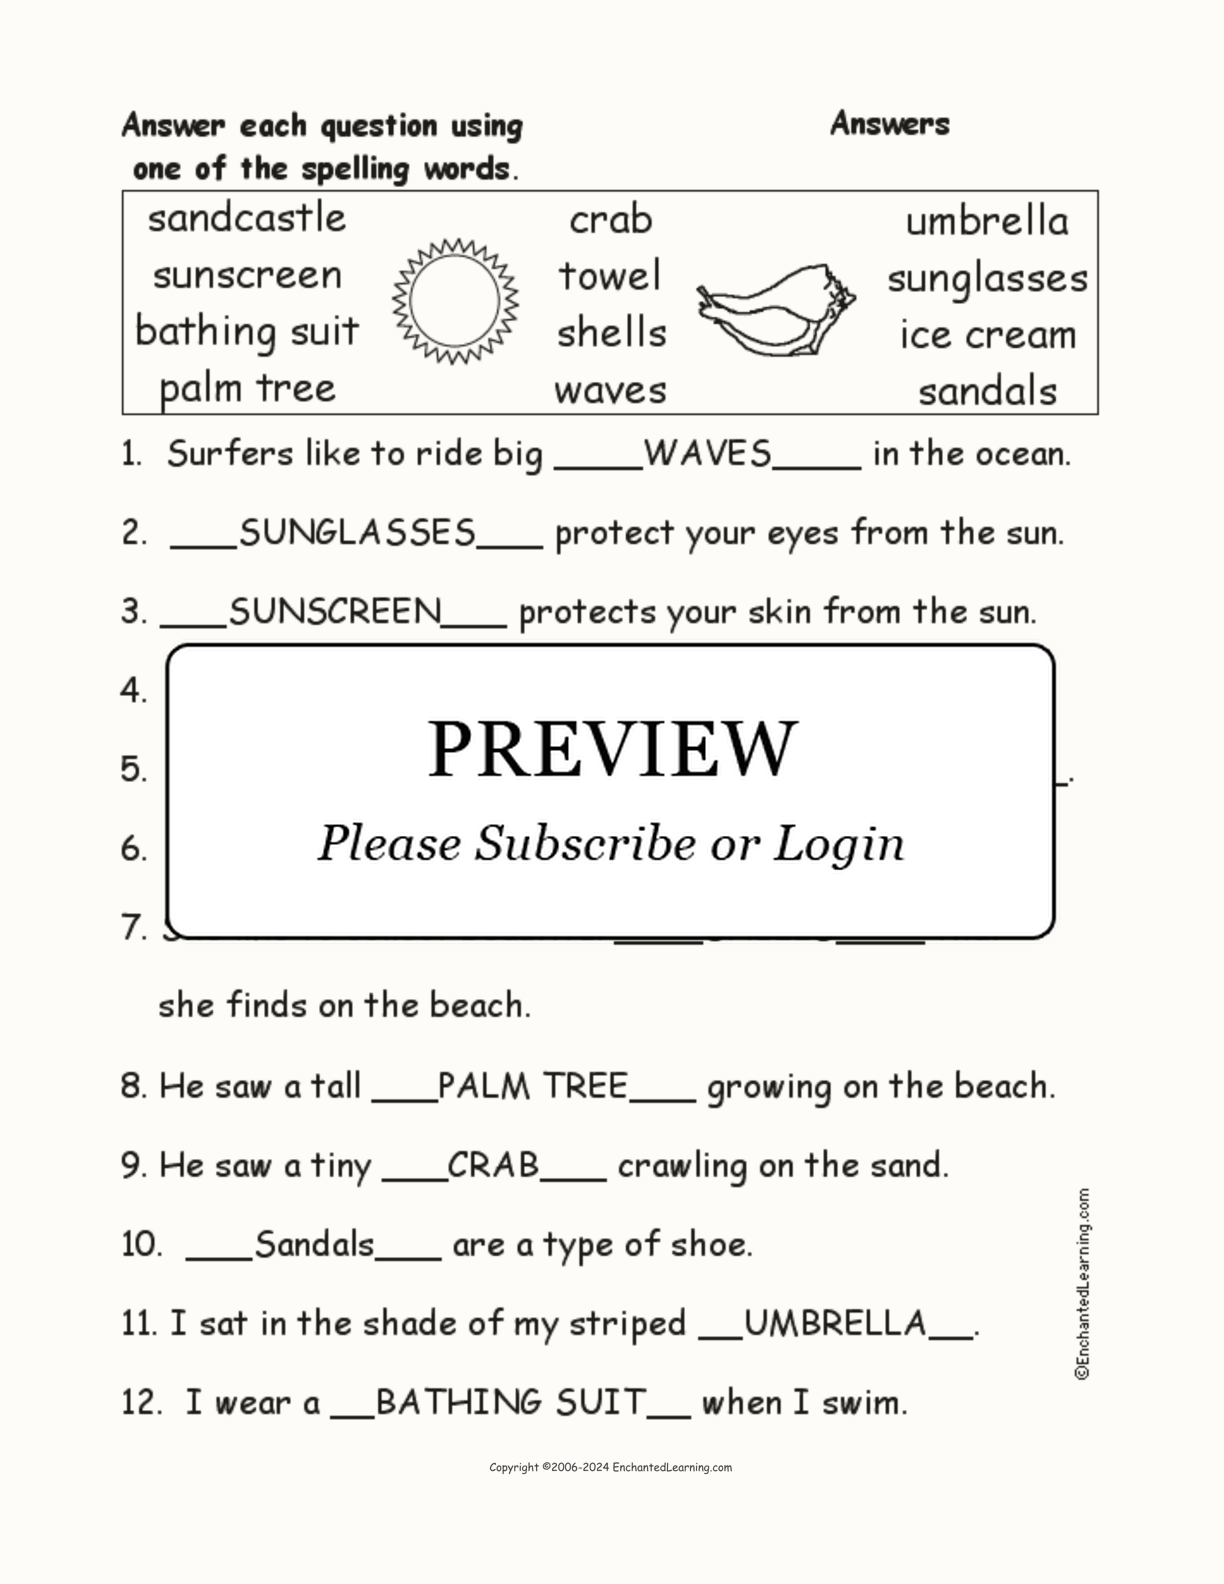 Beach Spelling Word Questions interactive worksheet page 2